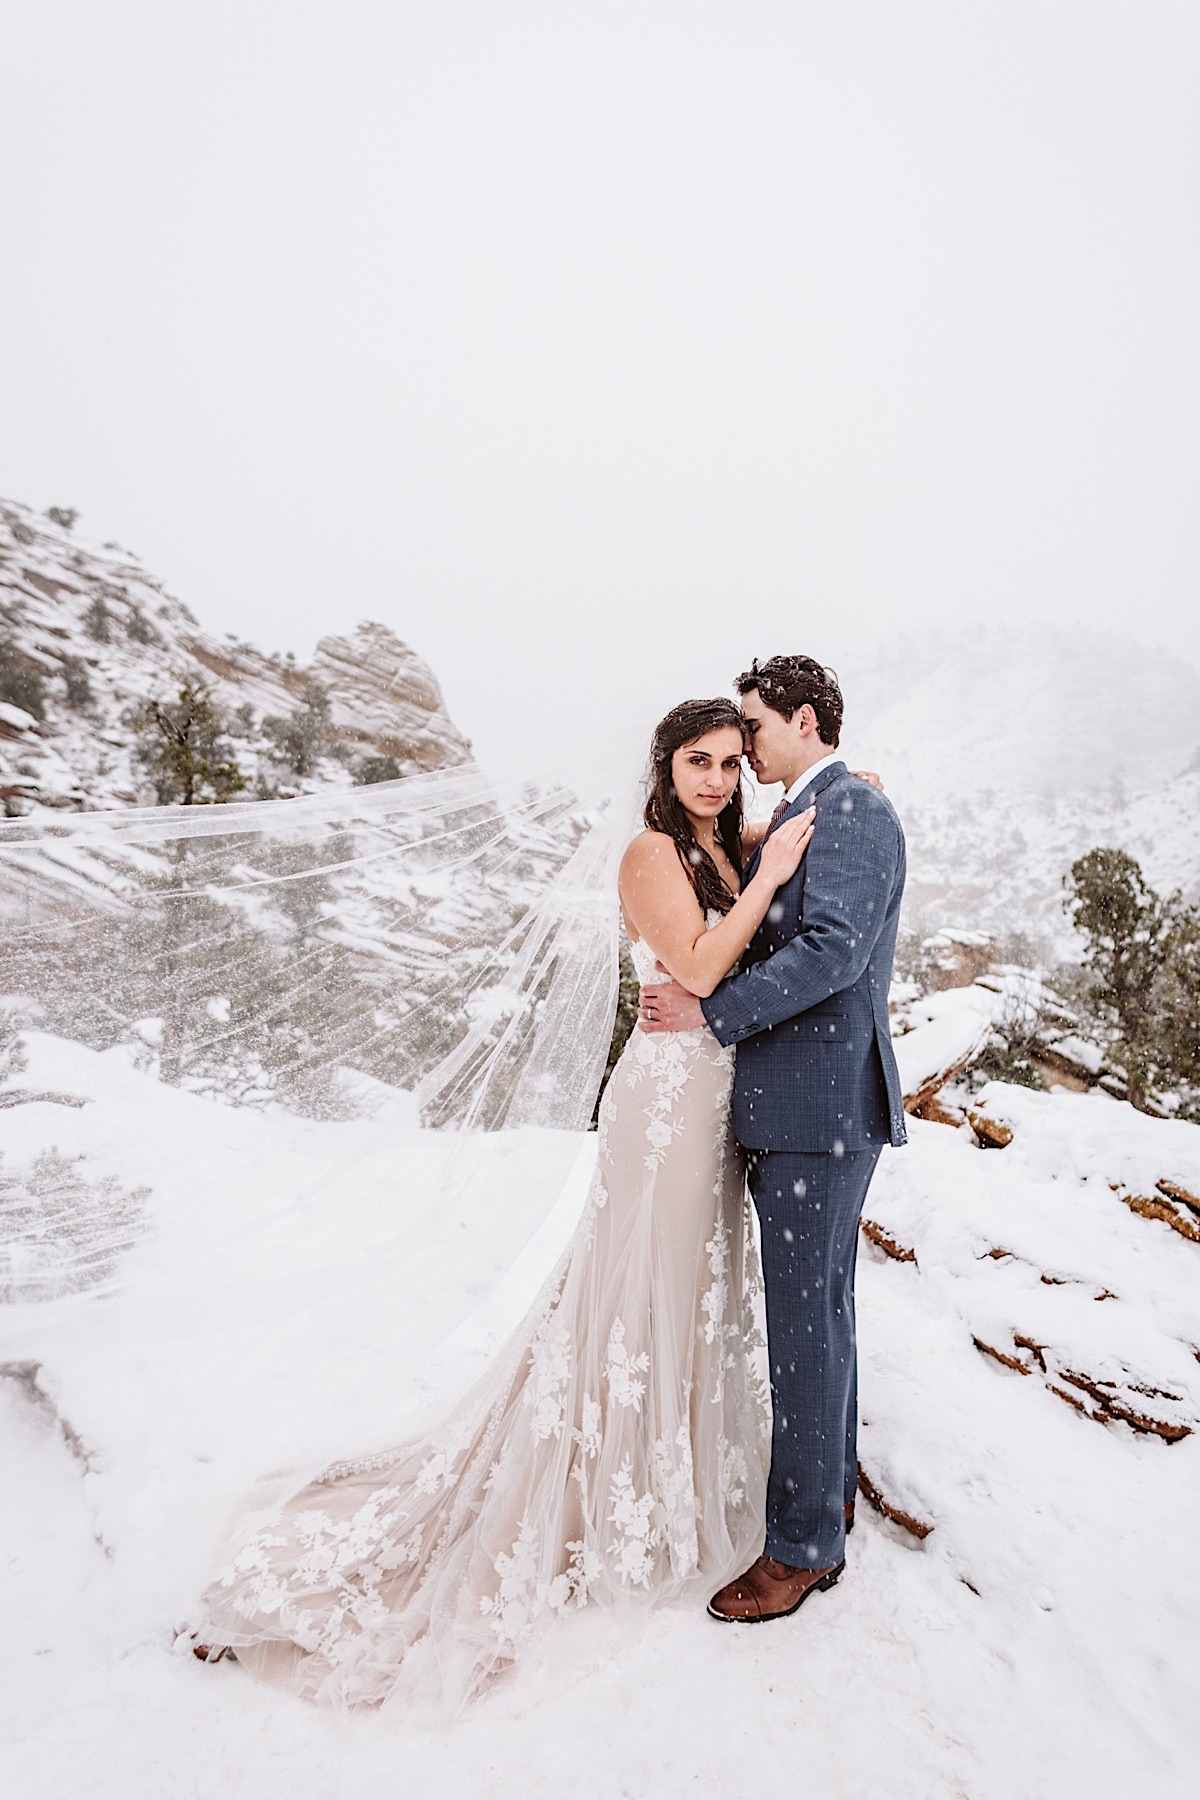 Bride and groom hold each other in front of red cliffs as snow falls around them. Brides veil streams behind her.